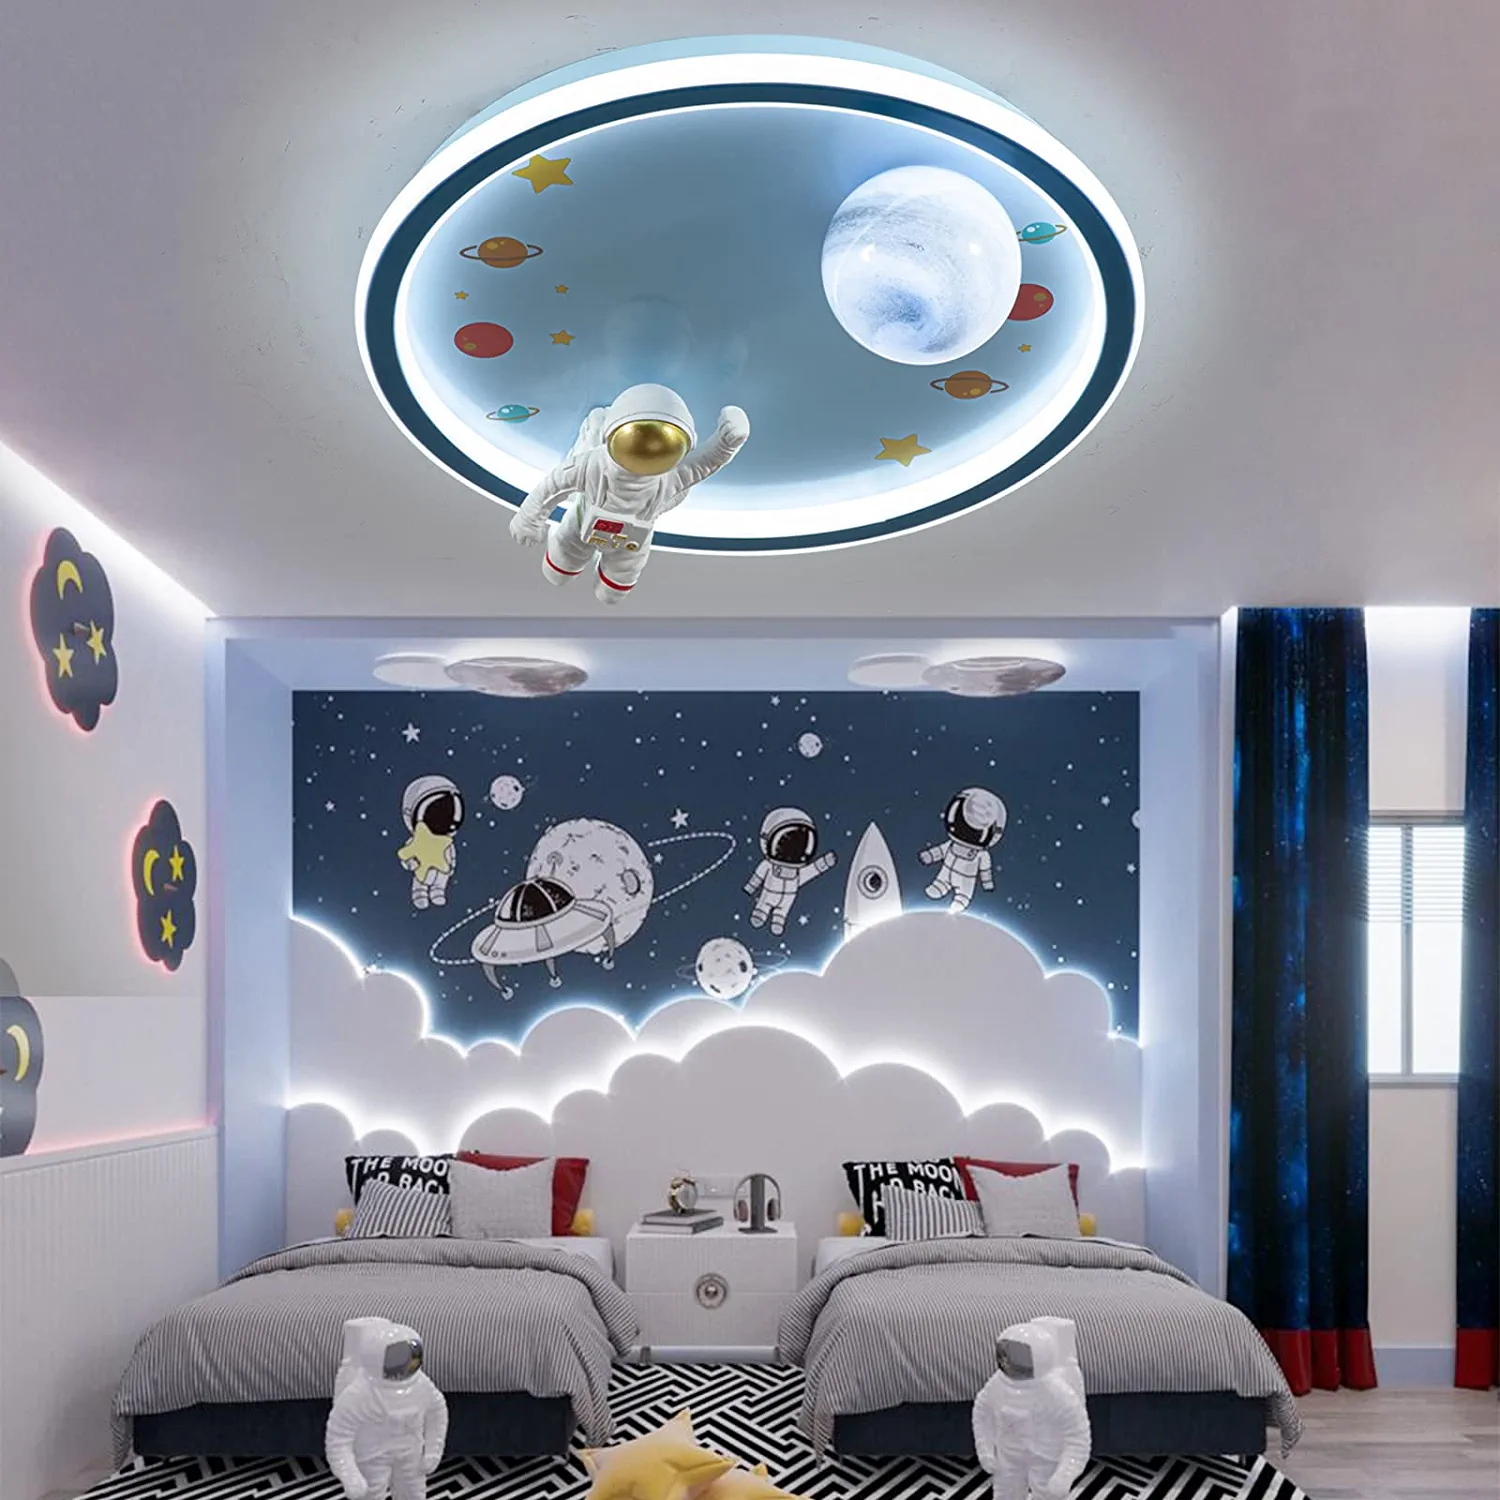 Outer space themed room - Toddler Boy Room Ideas - Baby Journey